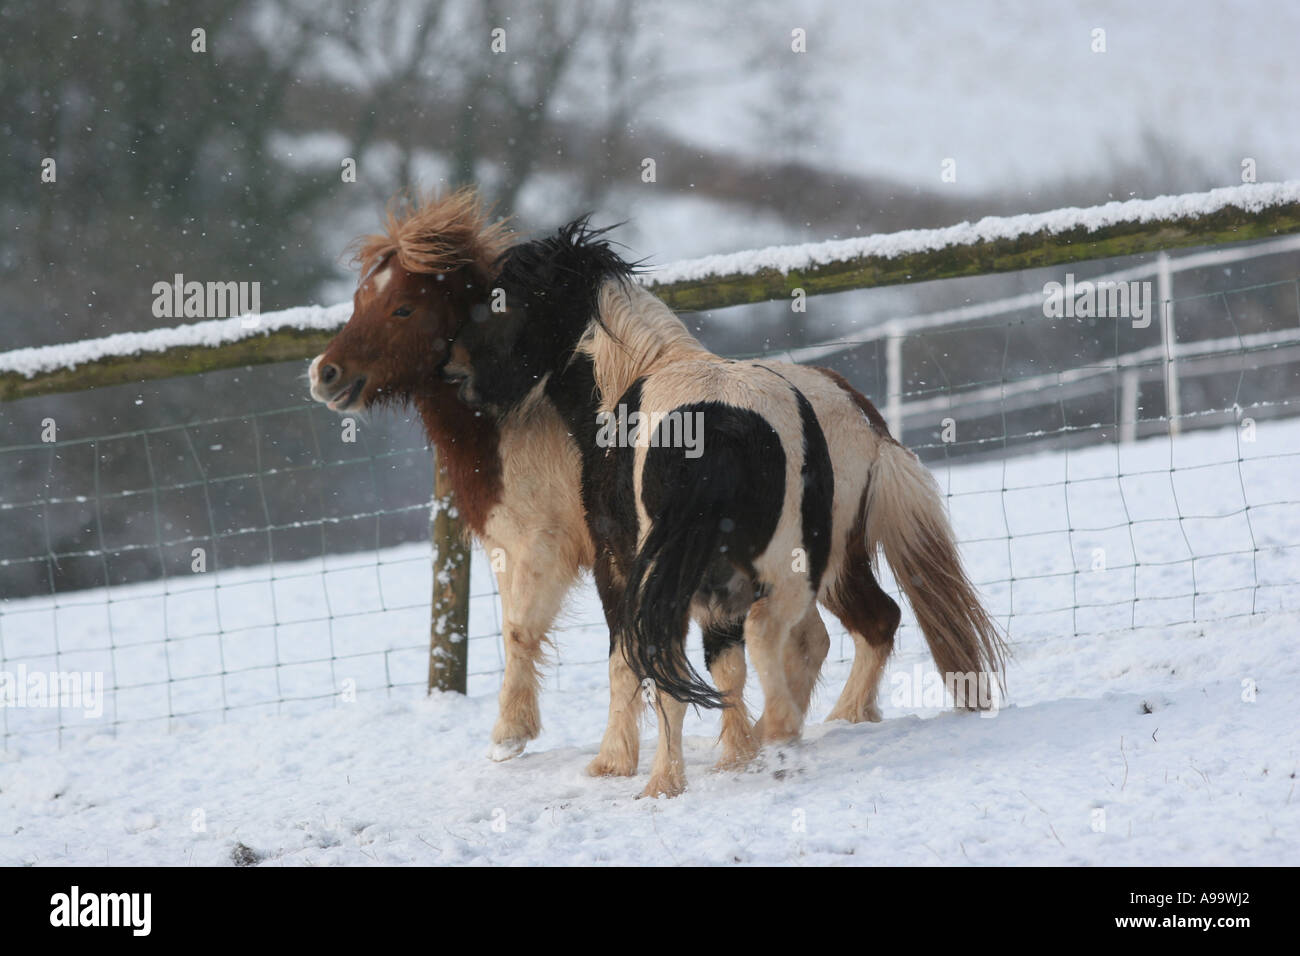 Miniature Horses in Snow Animal Natural World Environment Wales Stock Photo